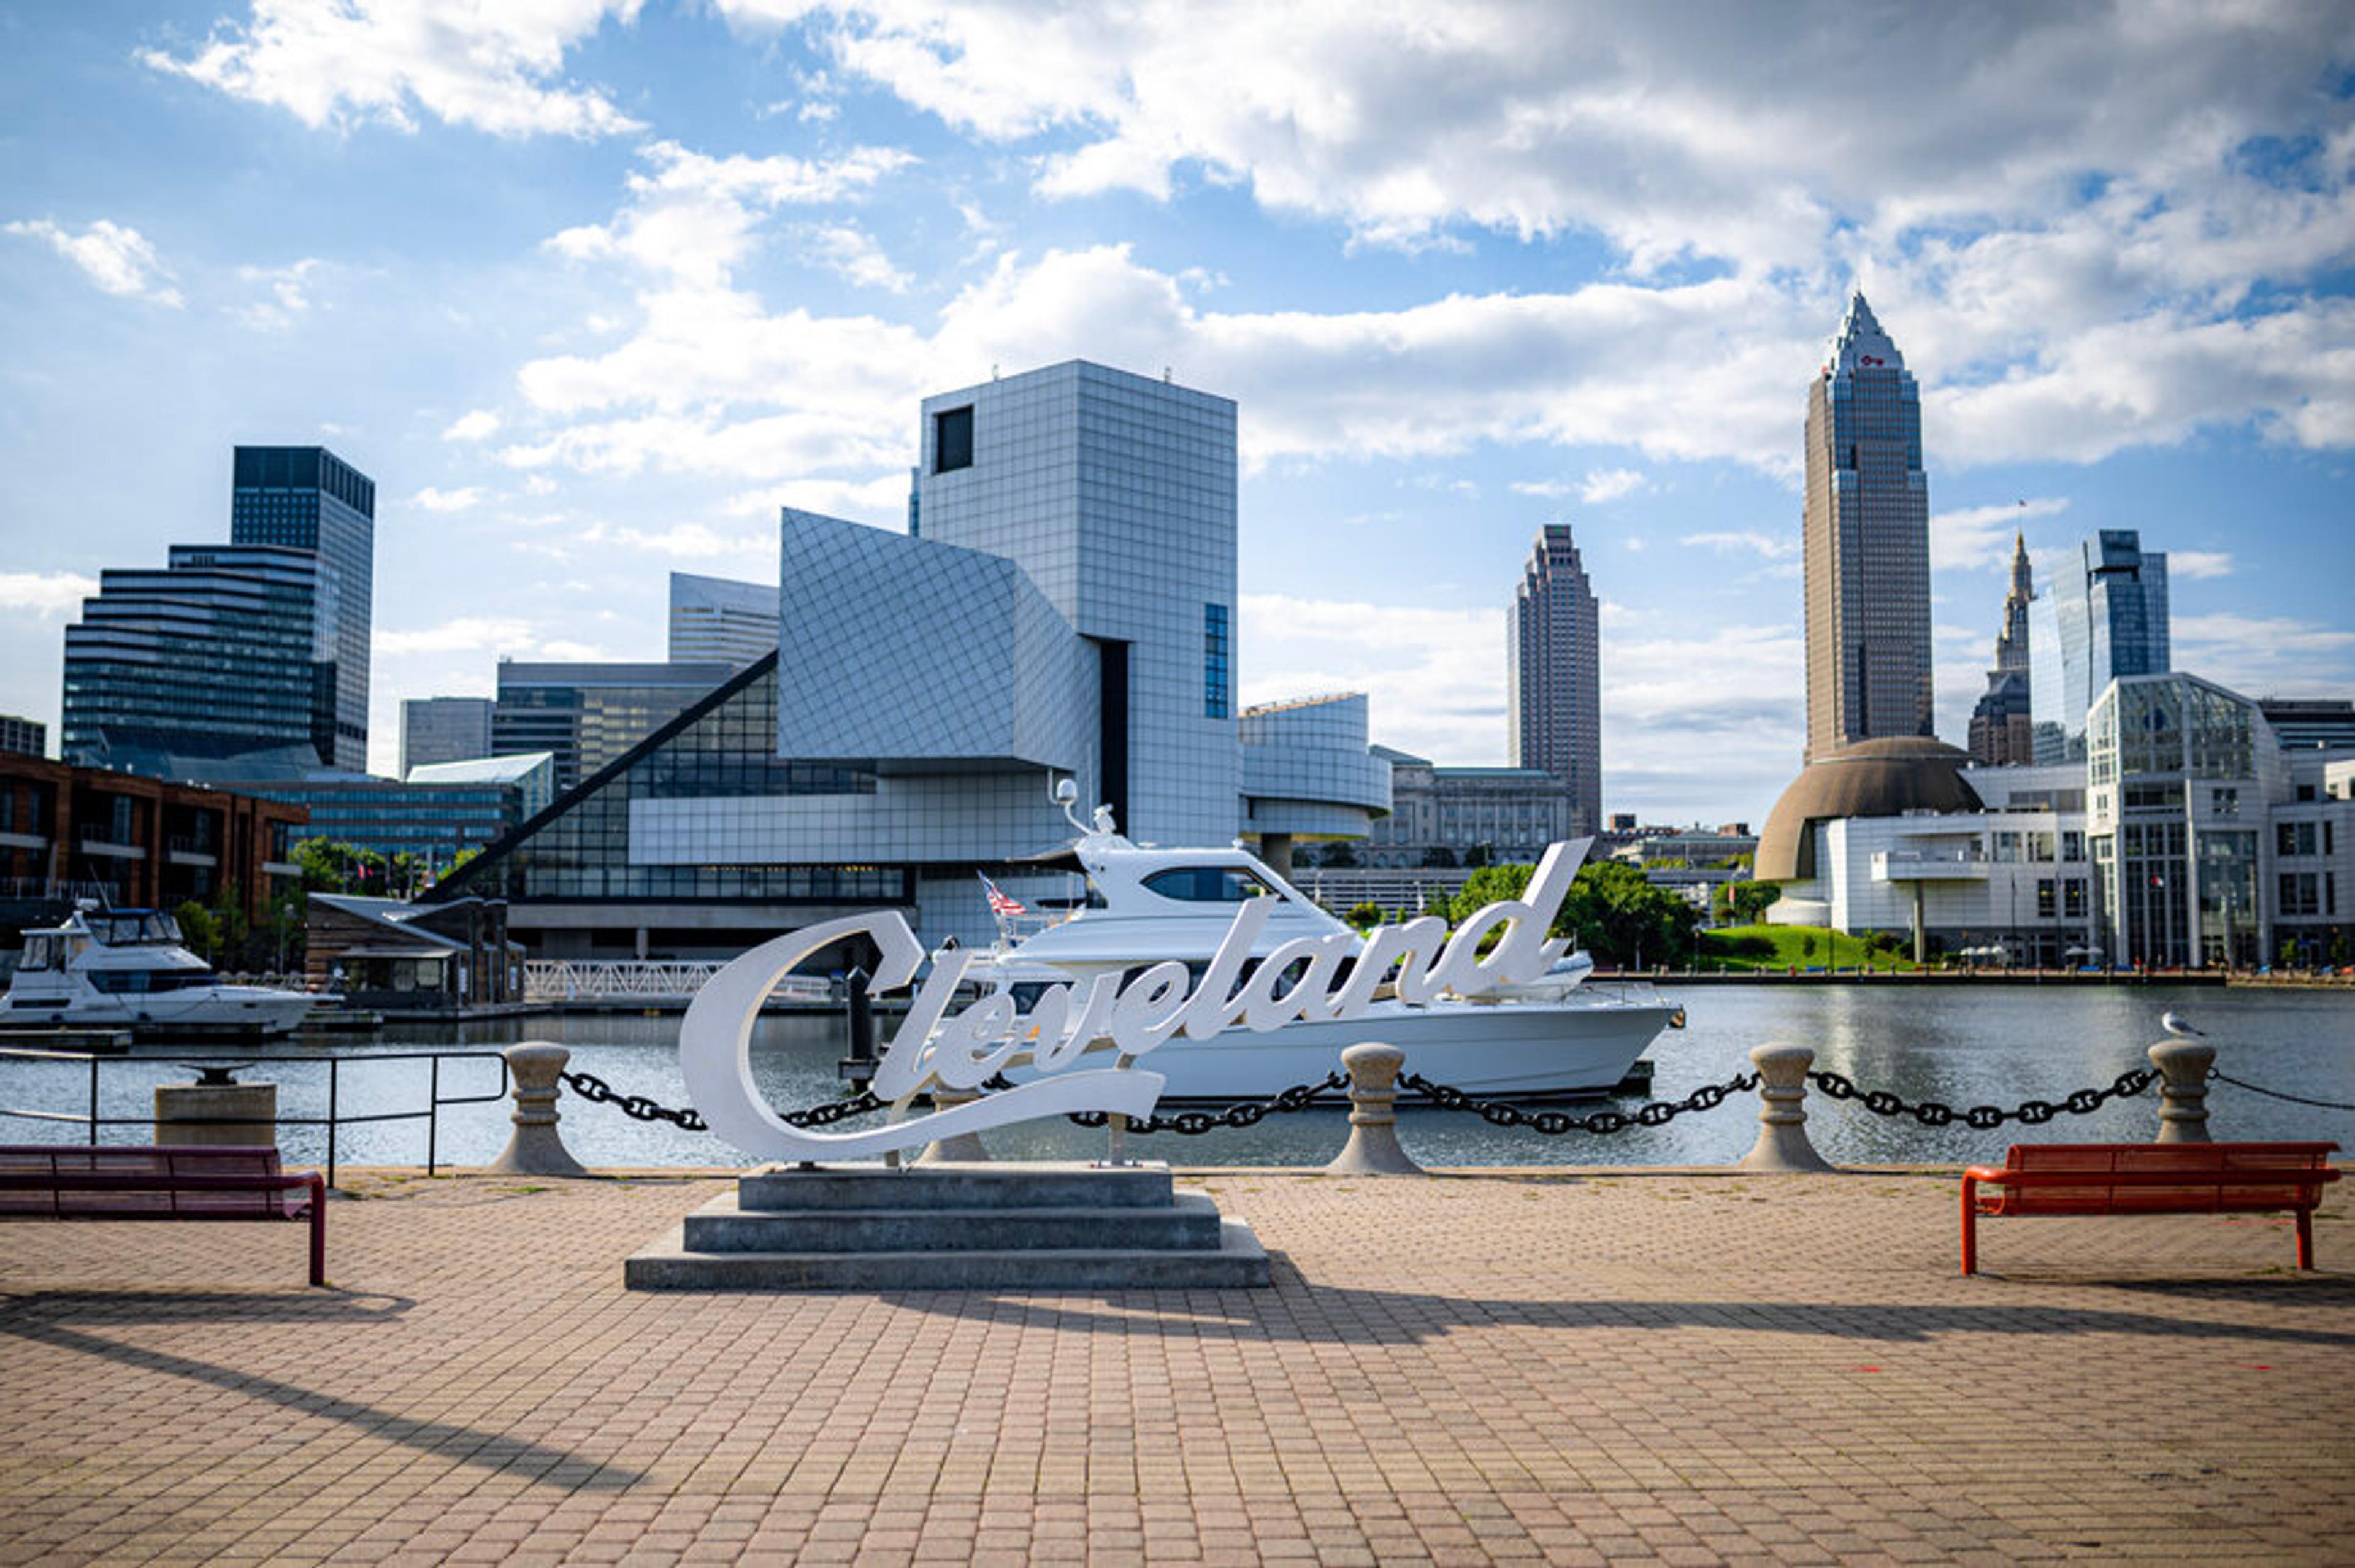 Is Cleveland the culture capital of the Midwest